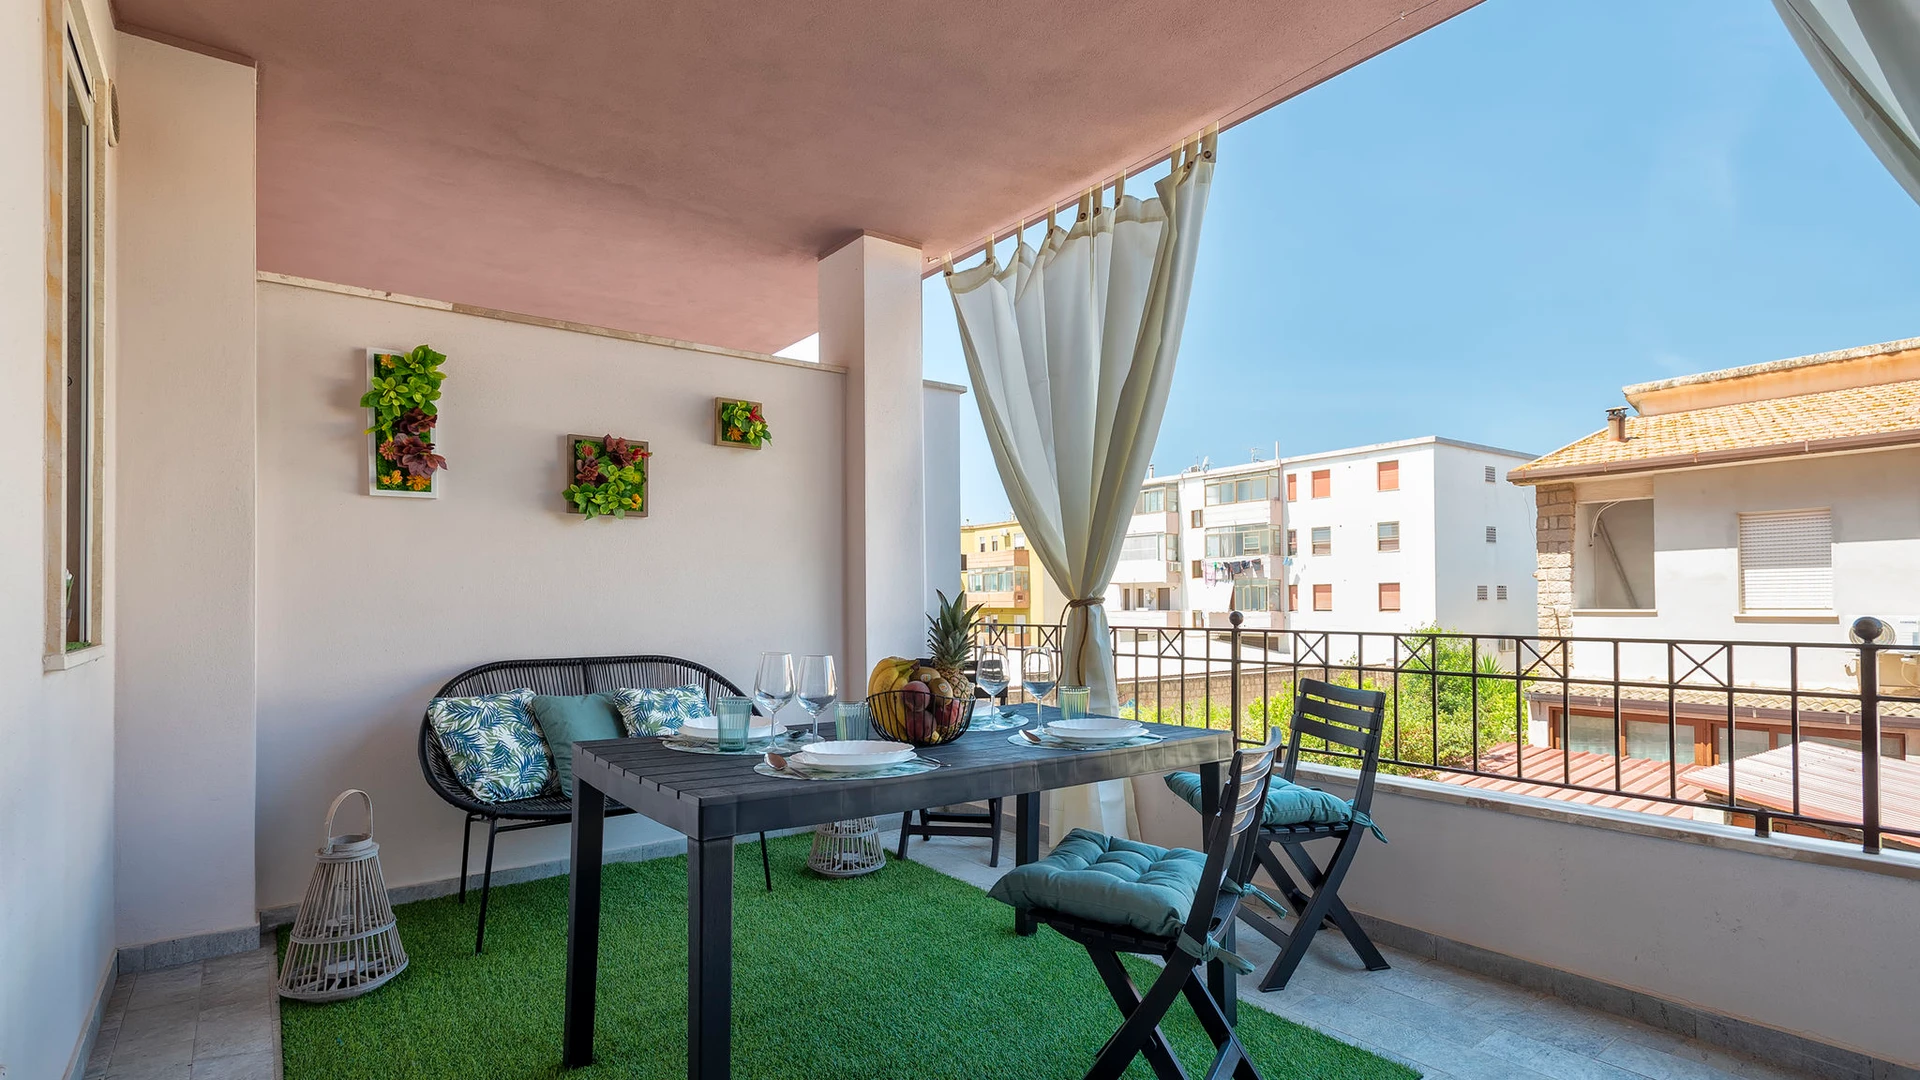 Accommodation with 3 bedrooms in L'alguer/alghero